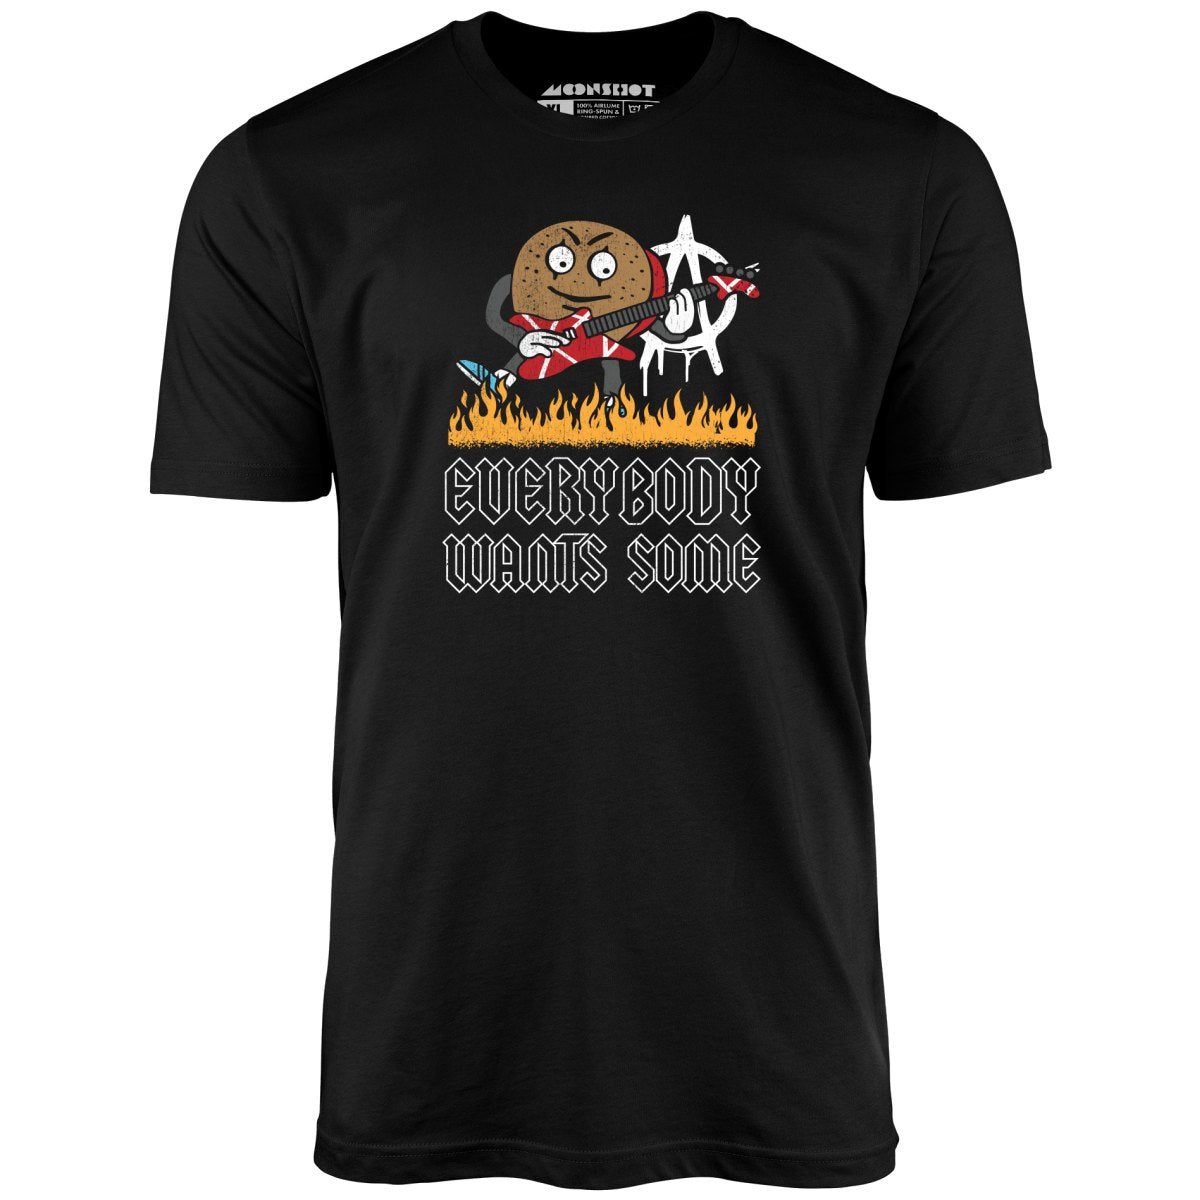 Everybody Wants Some - Unisex T-Shirt